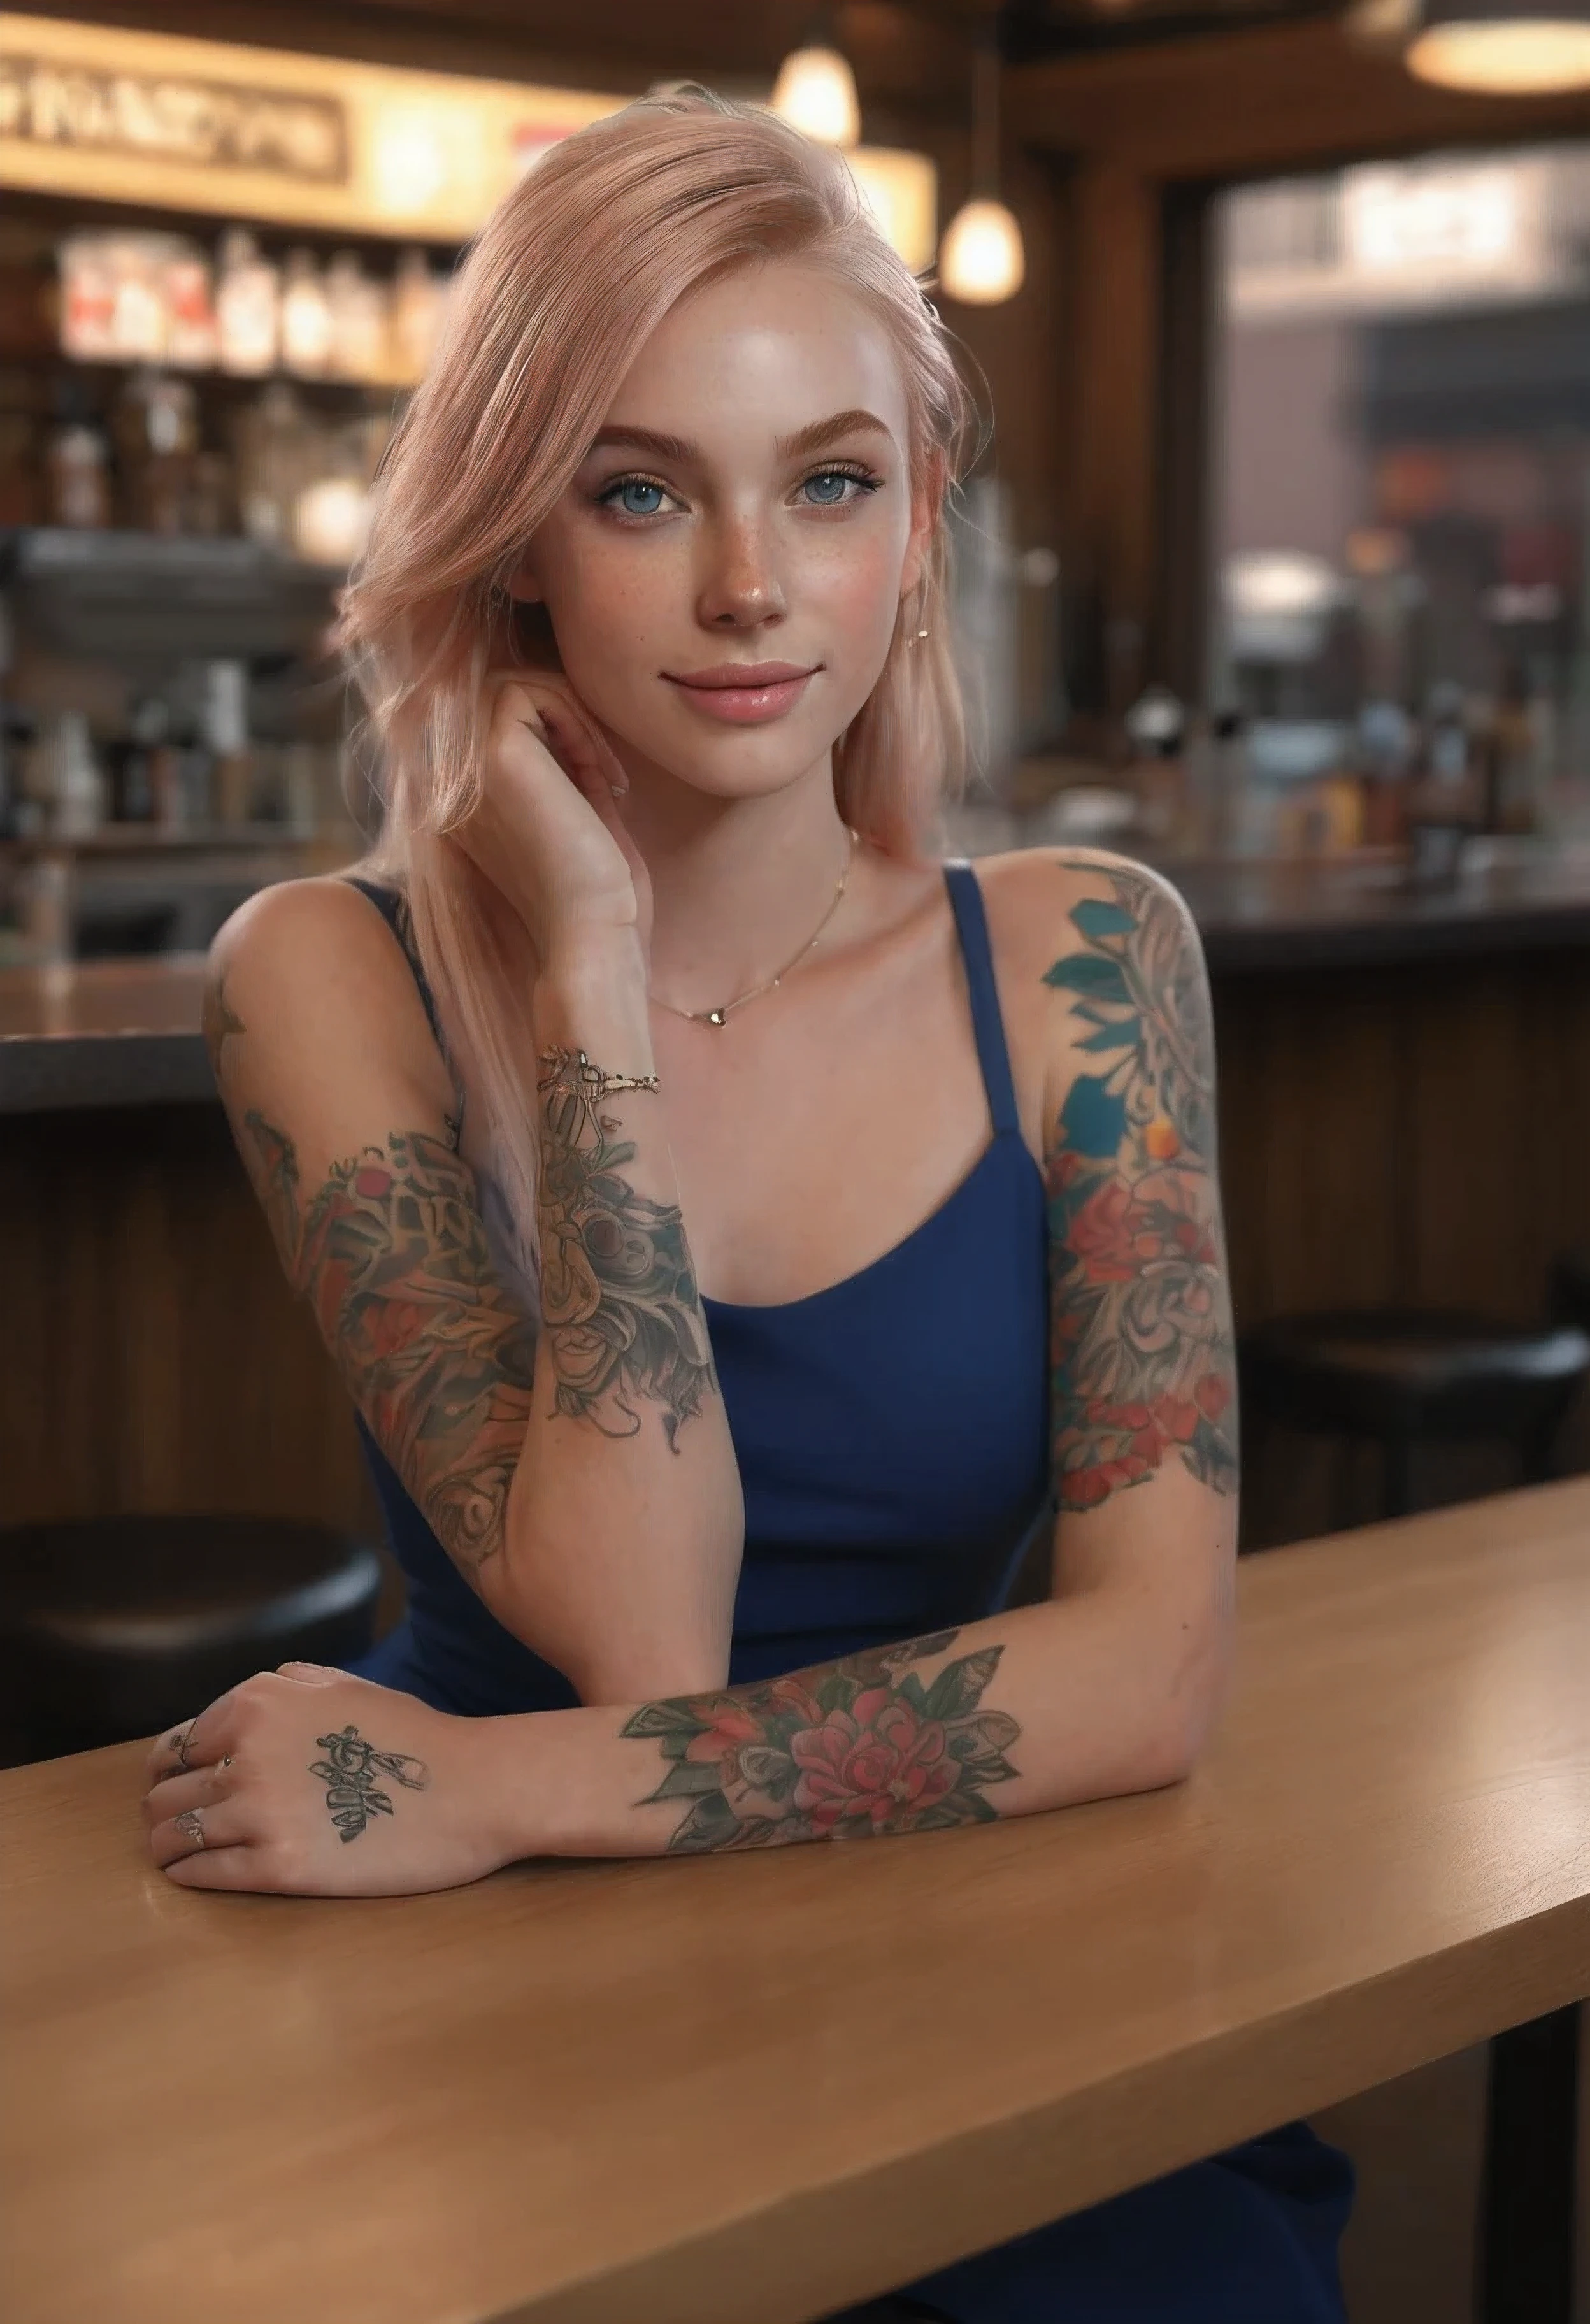 (realistic,tattooed,ginger:1.1)detailed girl(realistic, photorealistic:1.37),straight hair,detailed eyes, exposed and detailed arms (best quality,4k,8k,highres,masterpiece:1.2),wearing a dress,fine lines tattooed on both arms, sitting in a snack bar,hands on the table,lit by warm golden light,smiling face,relaxed pose,delicate facial features, looking at the viewer,perfect hands, detailed hands, detailed harms, detailed tatoo,blue eyes.